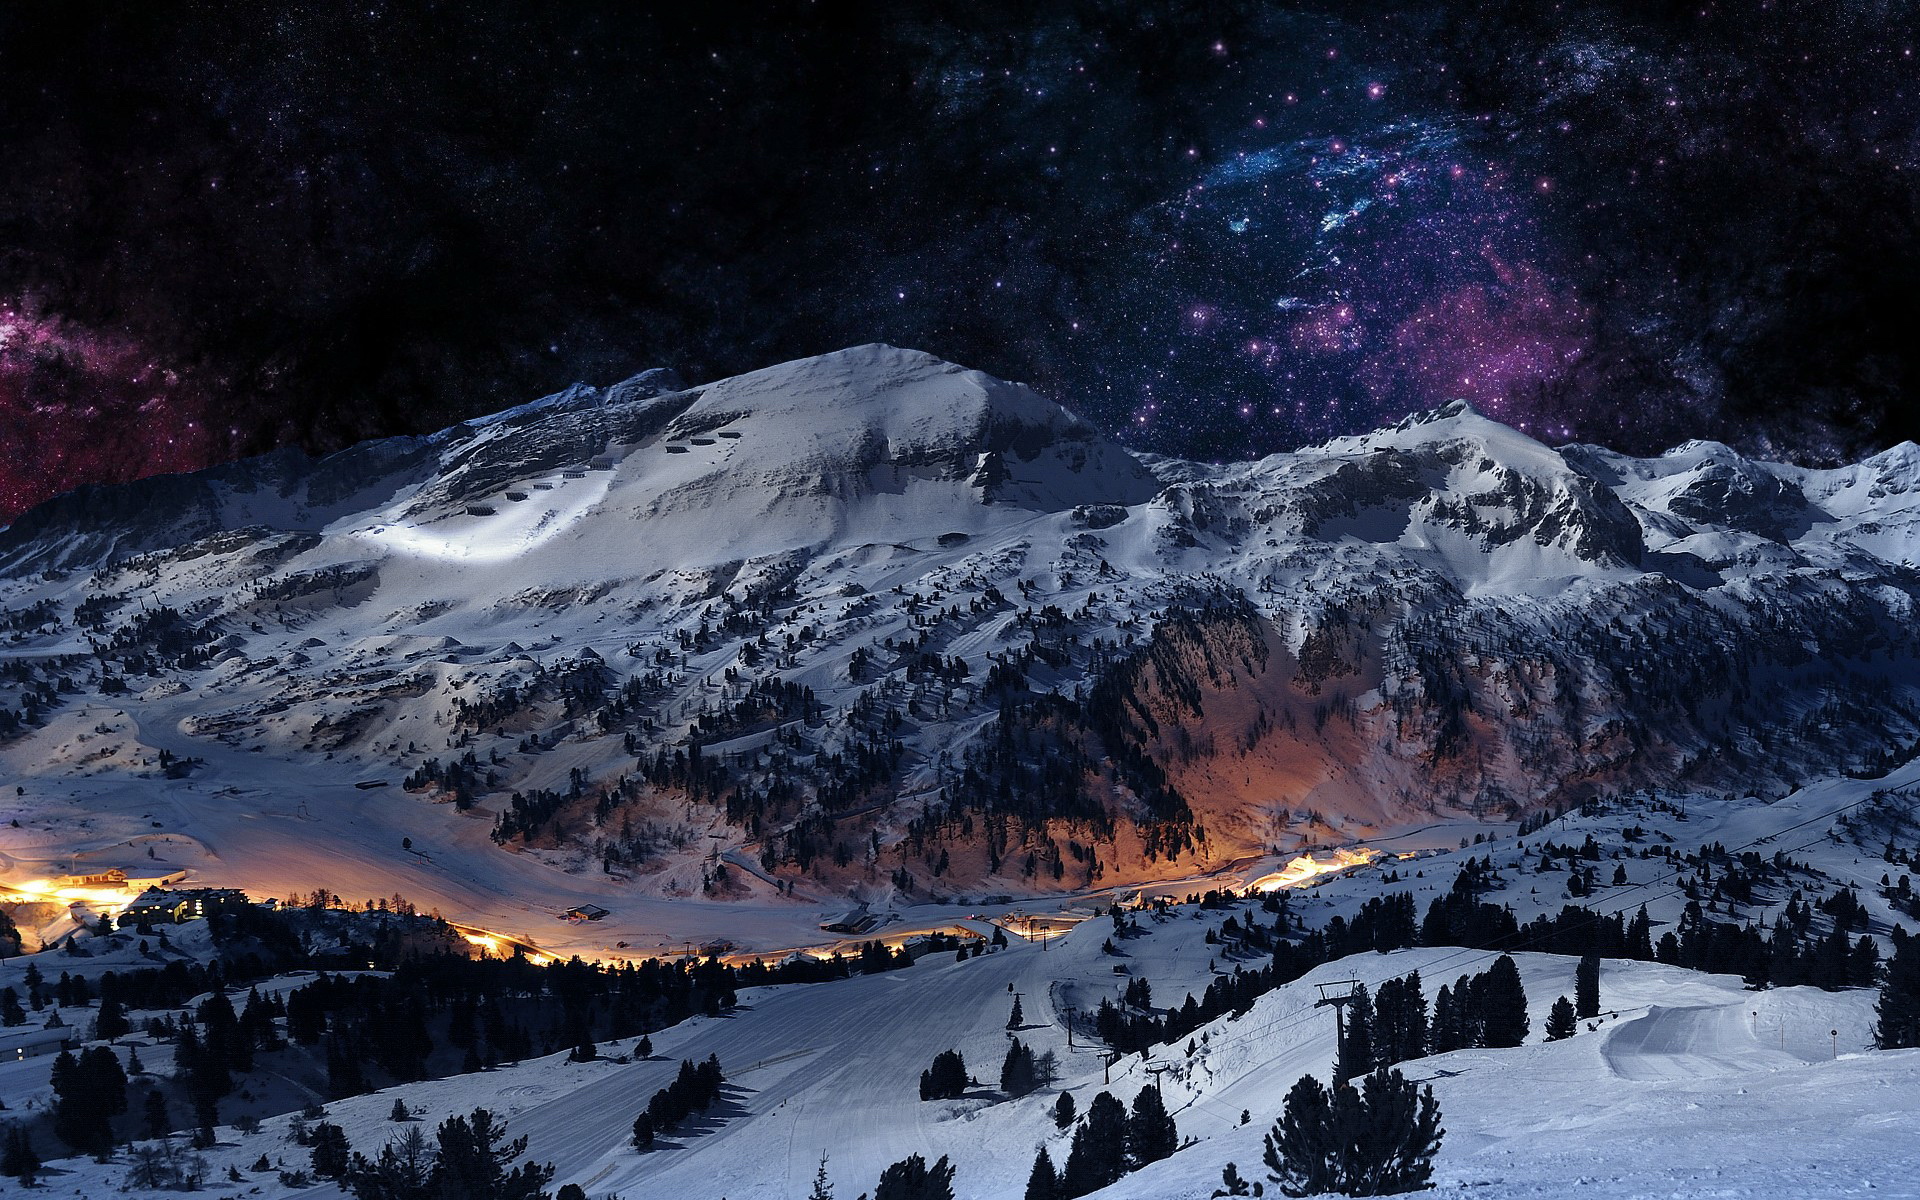 Snowy Mountains At Night HD Wallpaper Background Image